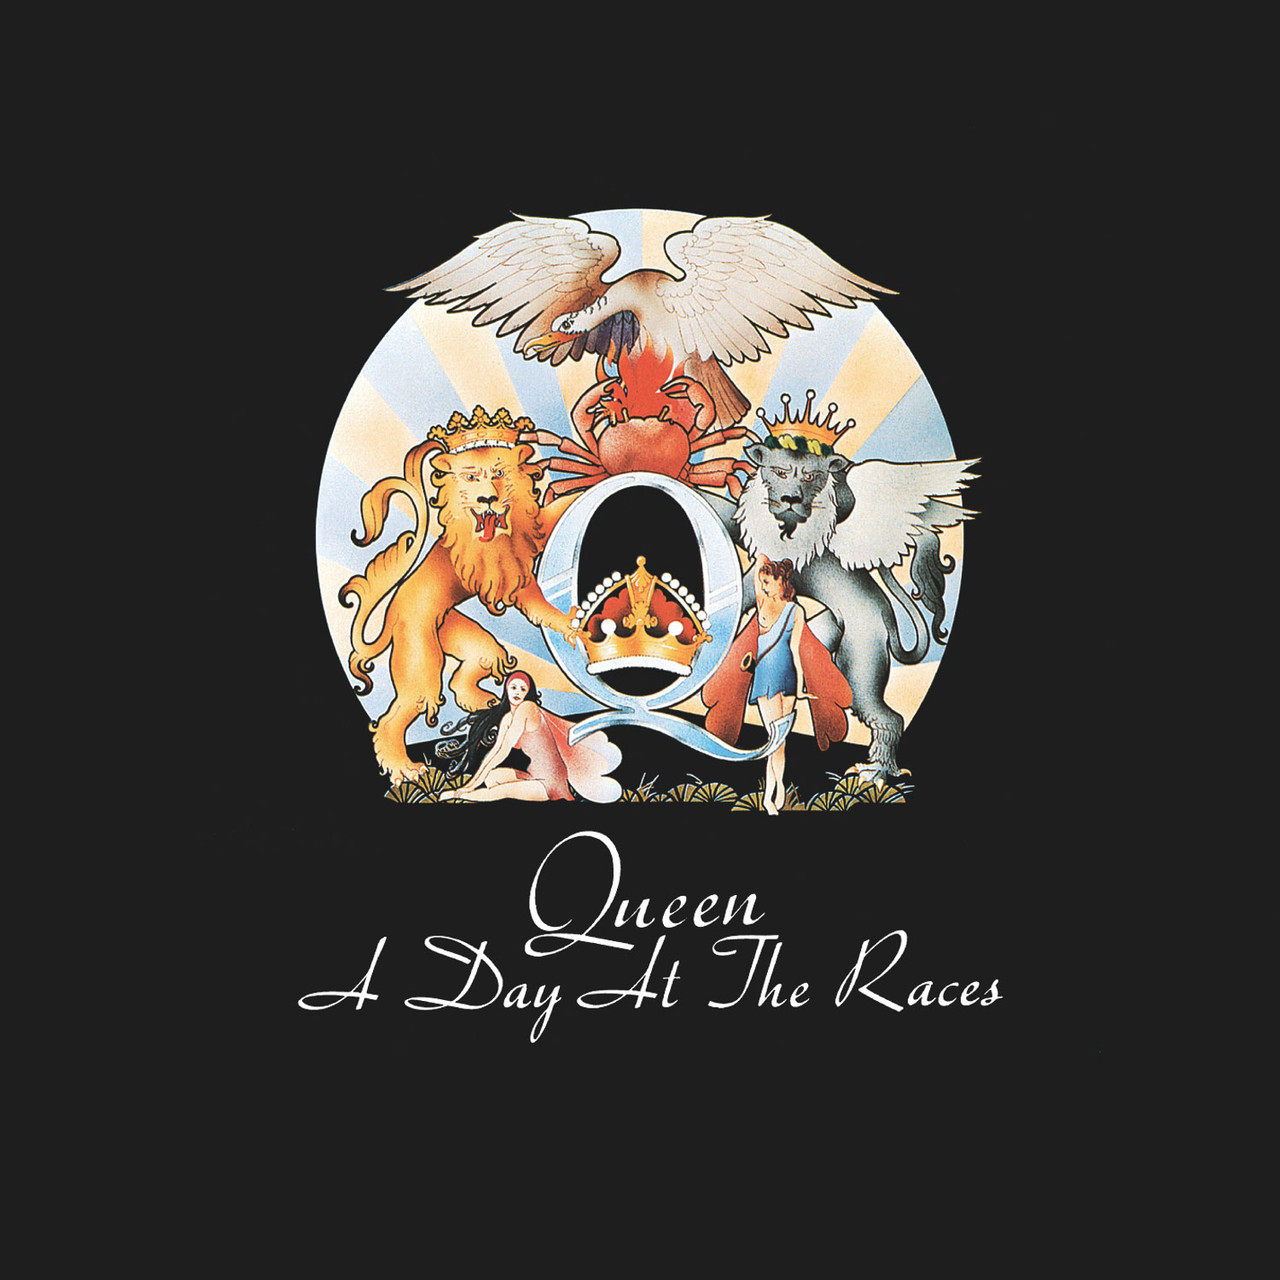 Queen A Day At The Races Half-Speed Mastered (2022 Pressing) 180g LP